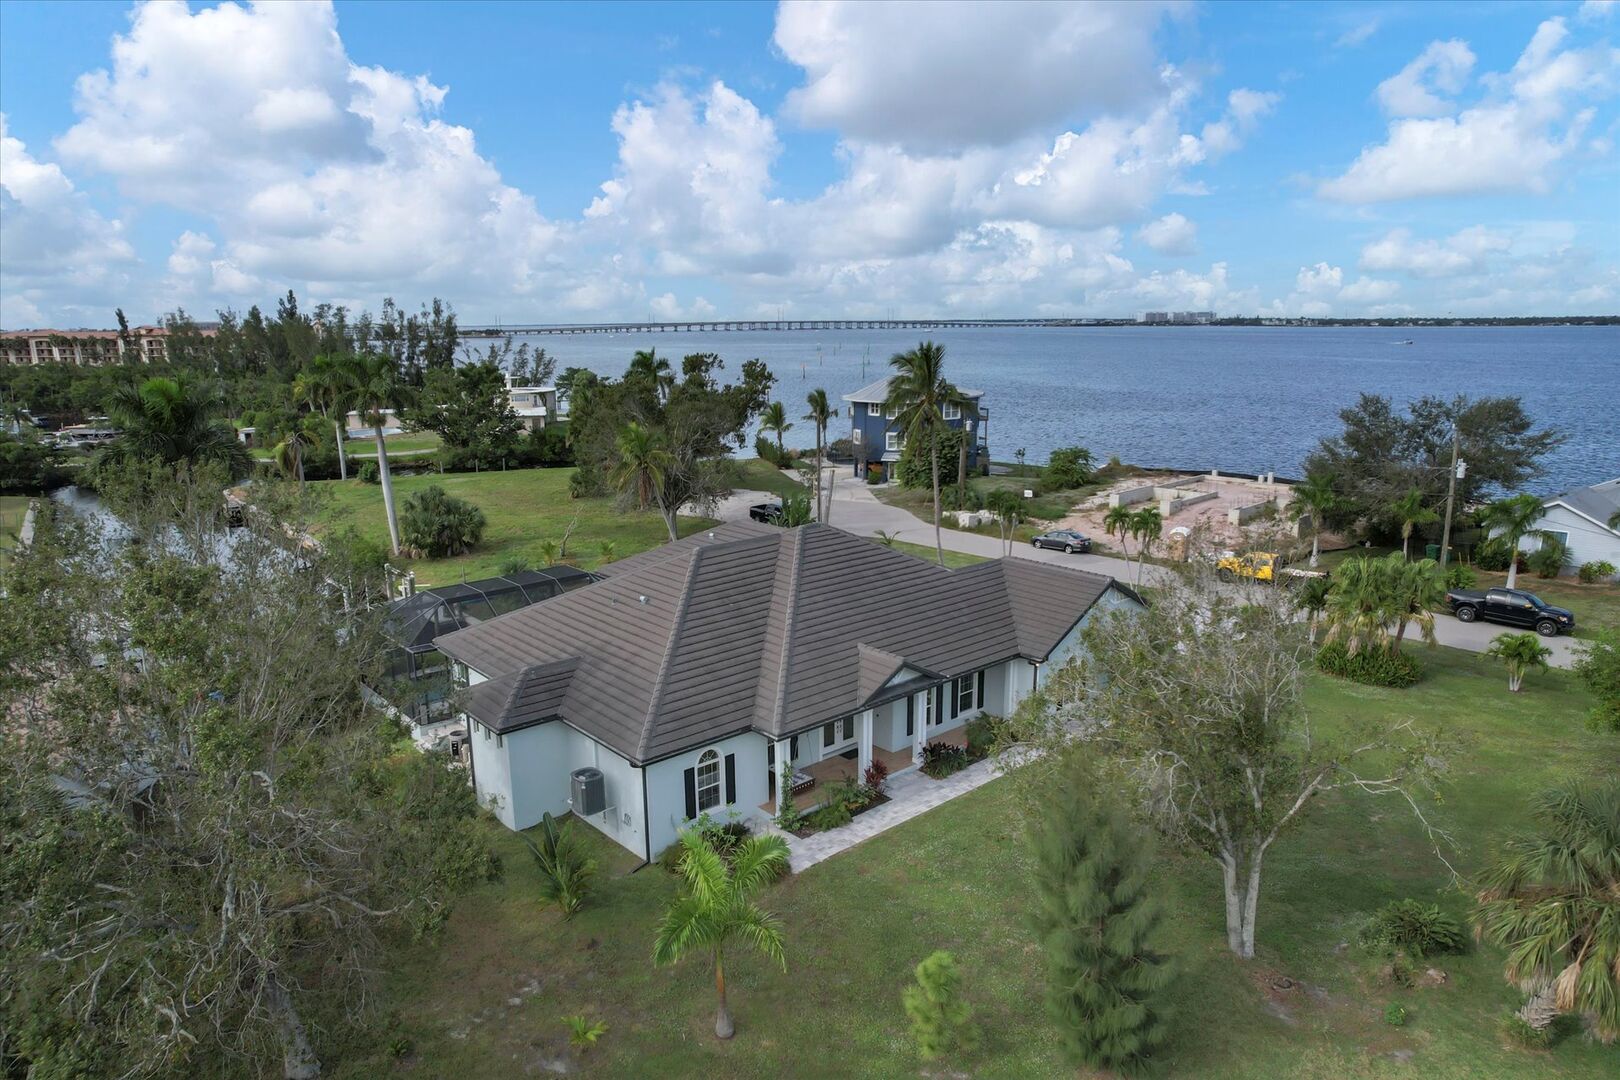 Stay in this beautiful Punta Gorda canal home with private pool on a quiest col-de-sac.